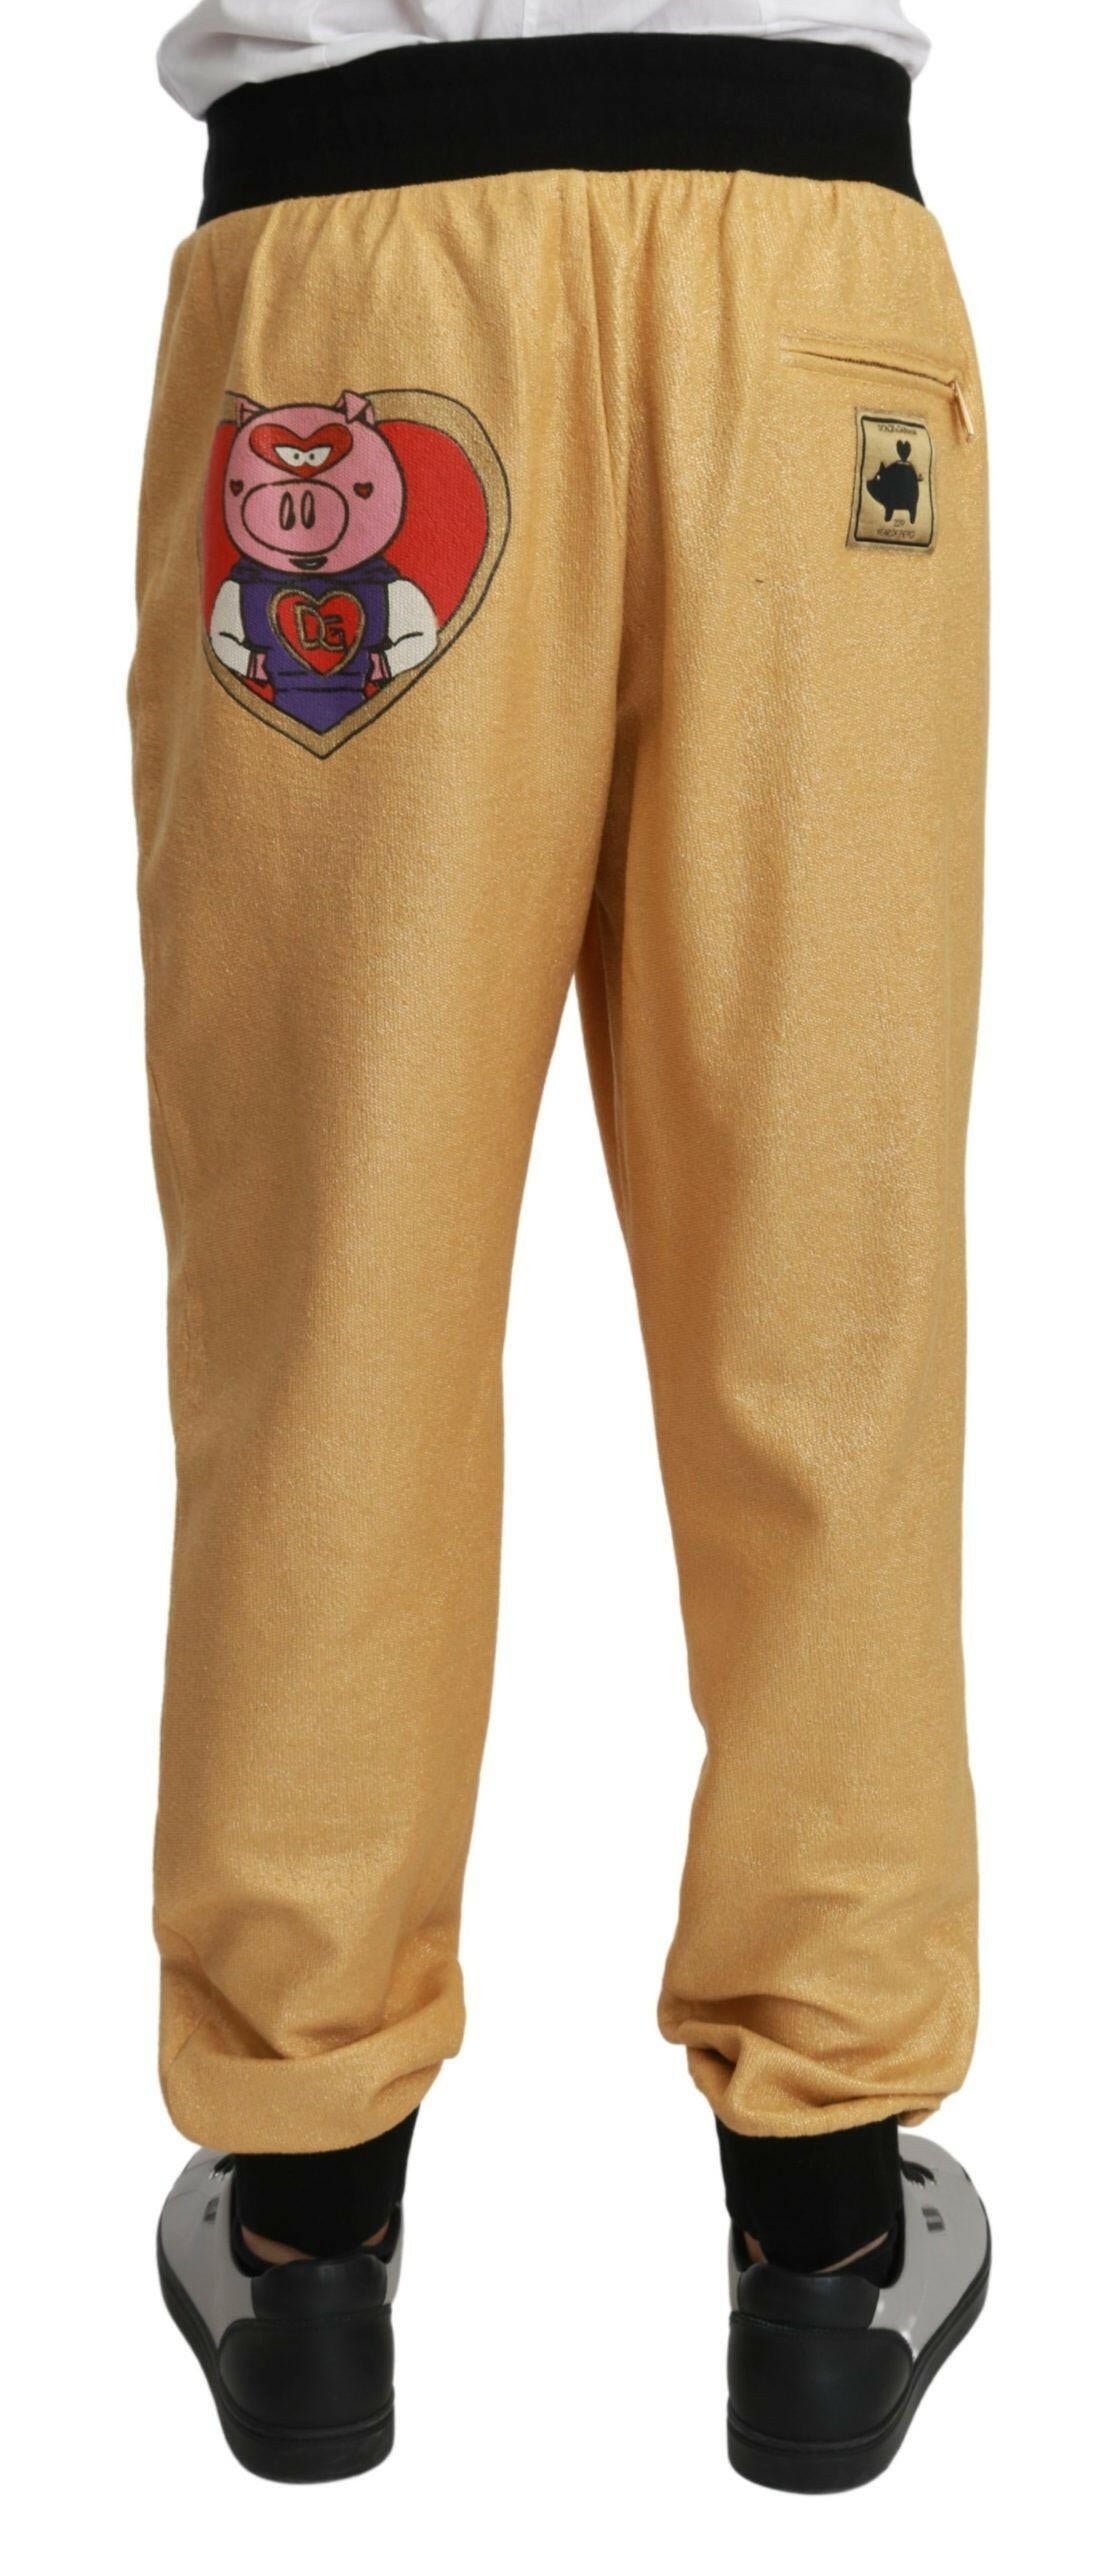 Dolce & Gabbana Gold Year Of The Pig Cotton Mens Pants - GENUINE AUTHENTIC BRAND LLC  